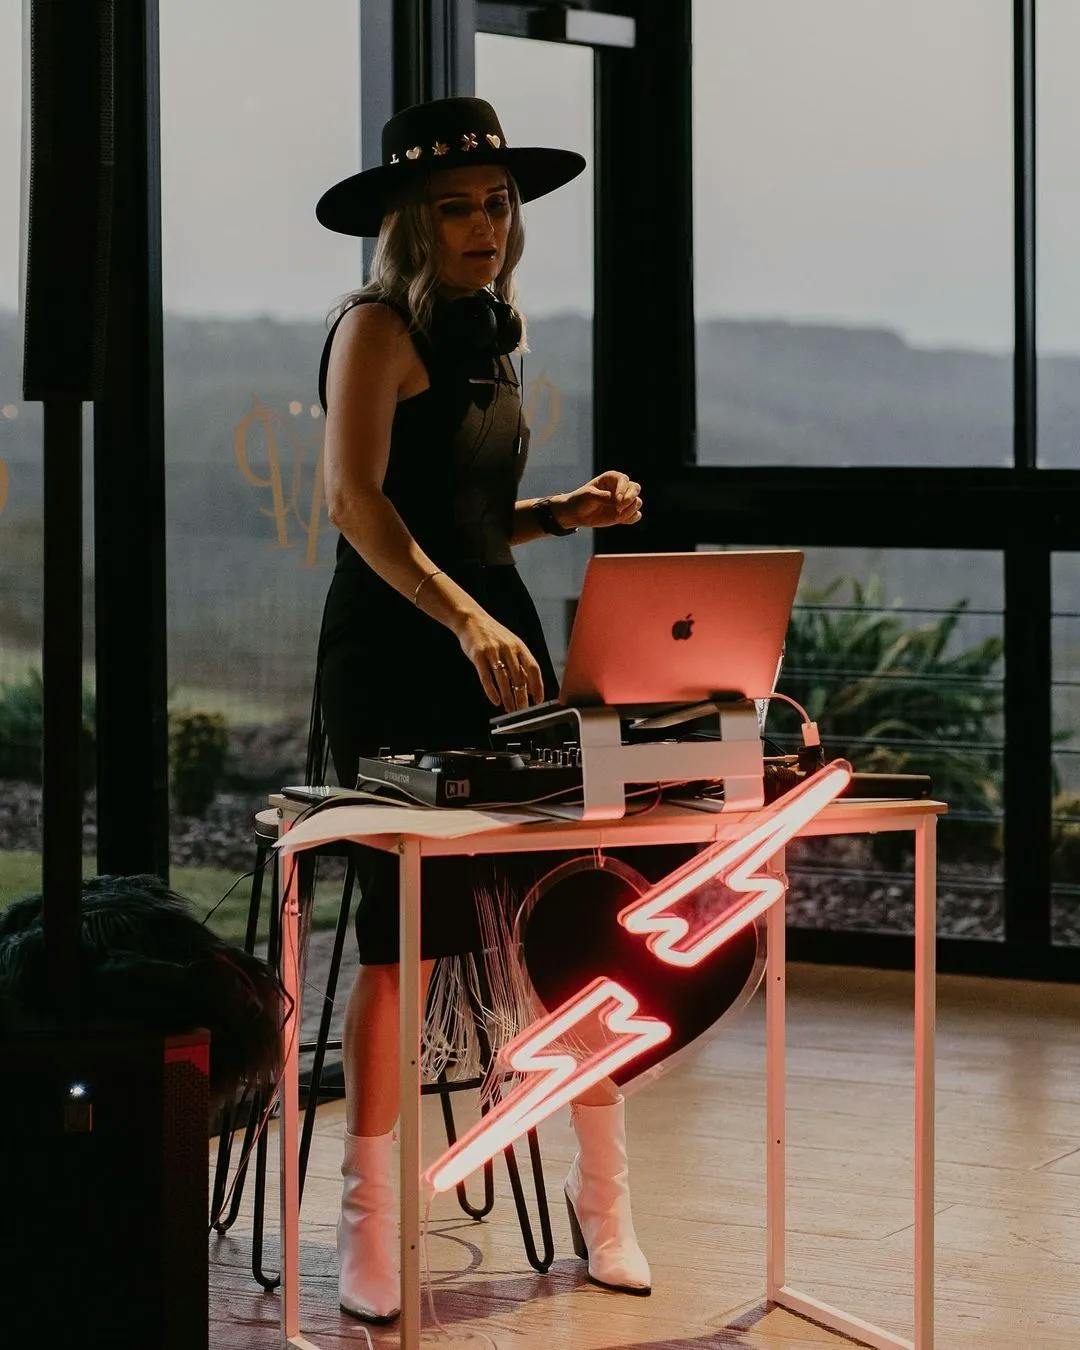 A DJ wearing a black dress, wide-brimmed hat, and white boots stands behind a table with a laptop and DJ equipment. The table is decorated with a neon light shaped like lightning bolts. The background shows large windows overlooking a landscape.